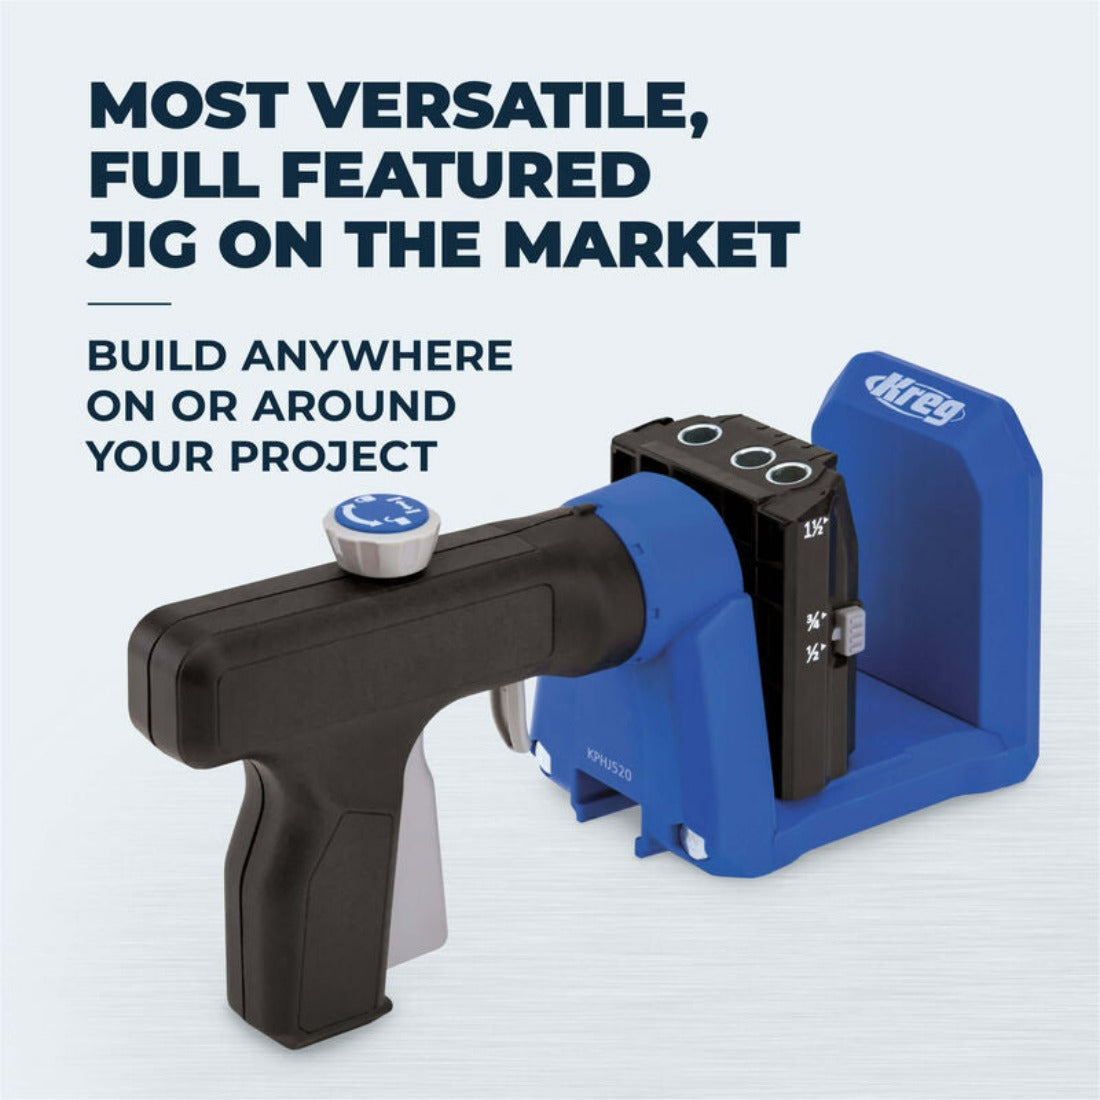 image with description that the 520pro is most versatile, full featured jig on the market. Slogan of "build anywhere on or around your project"